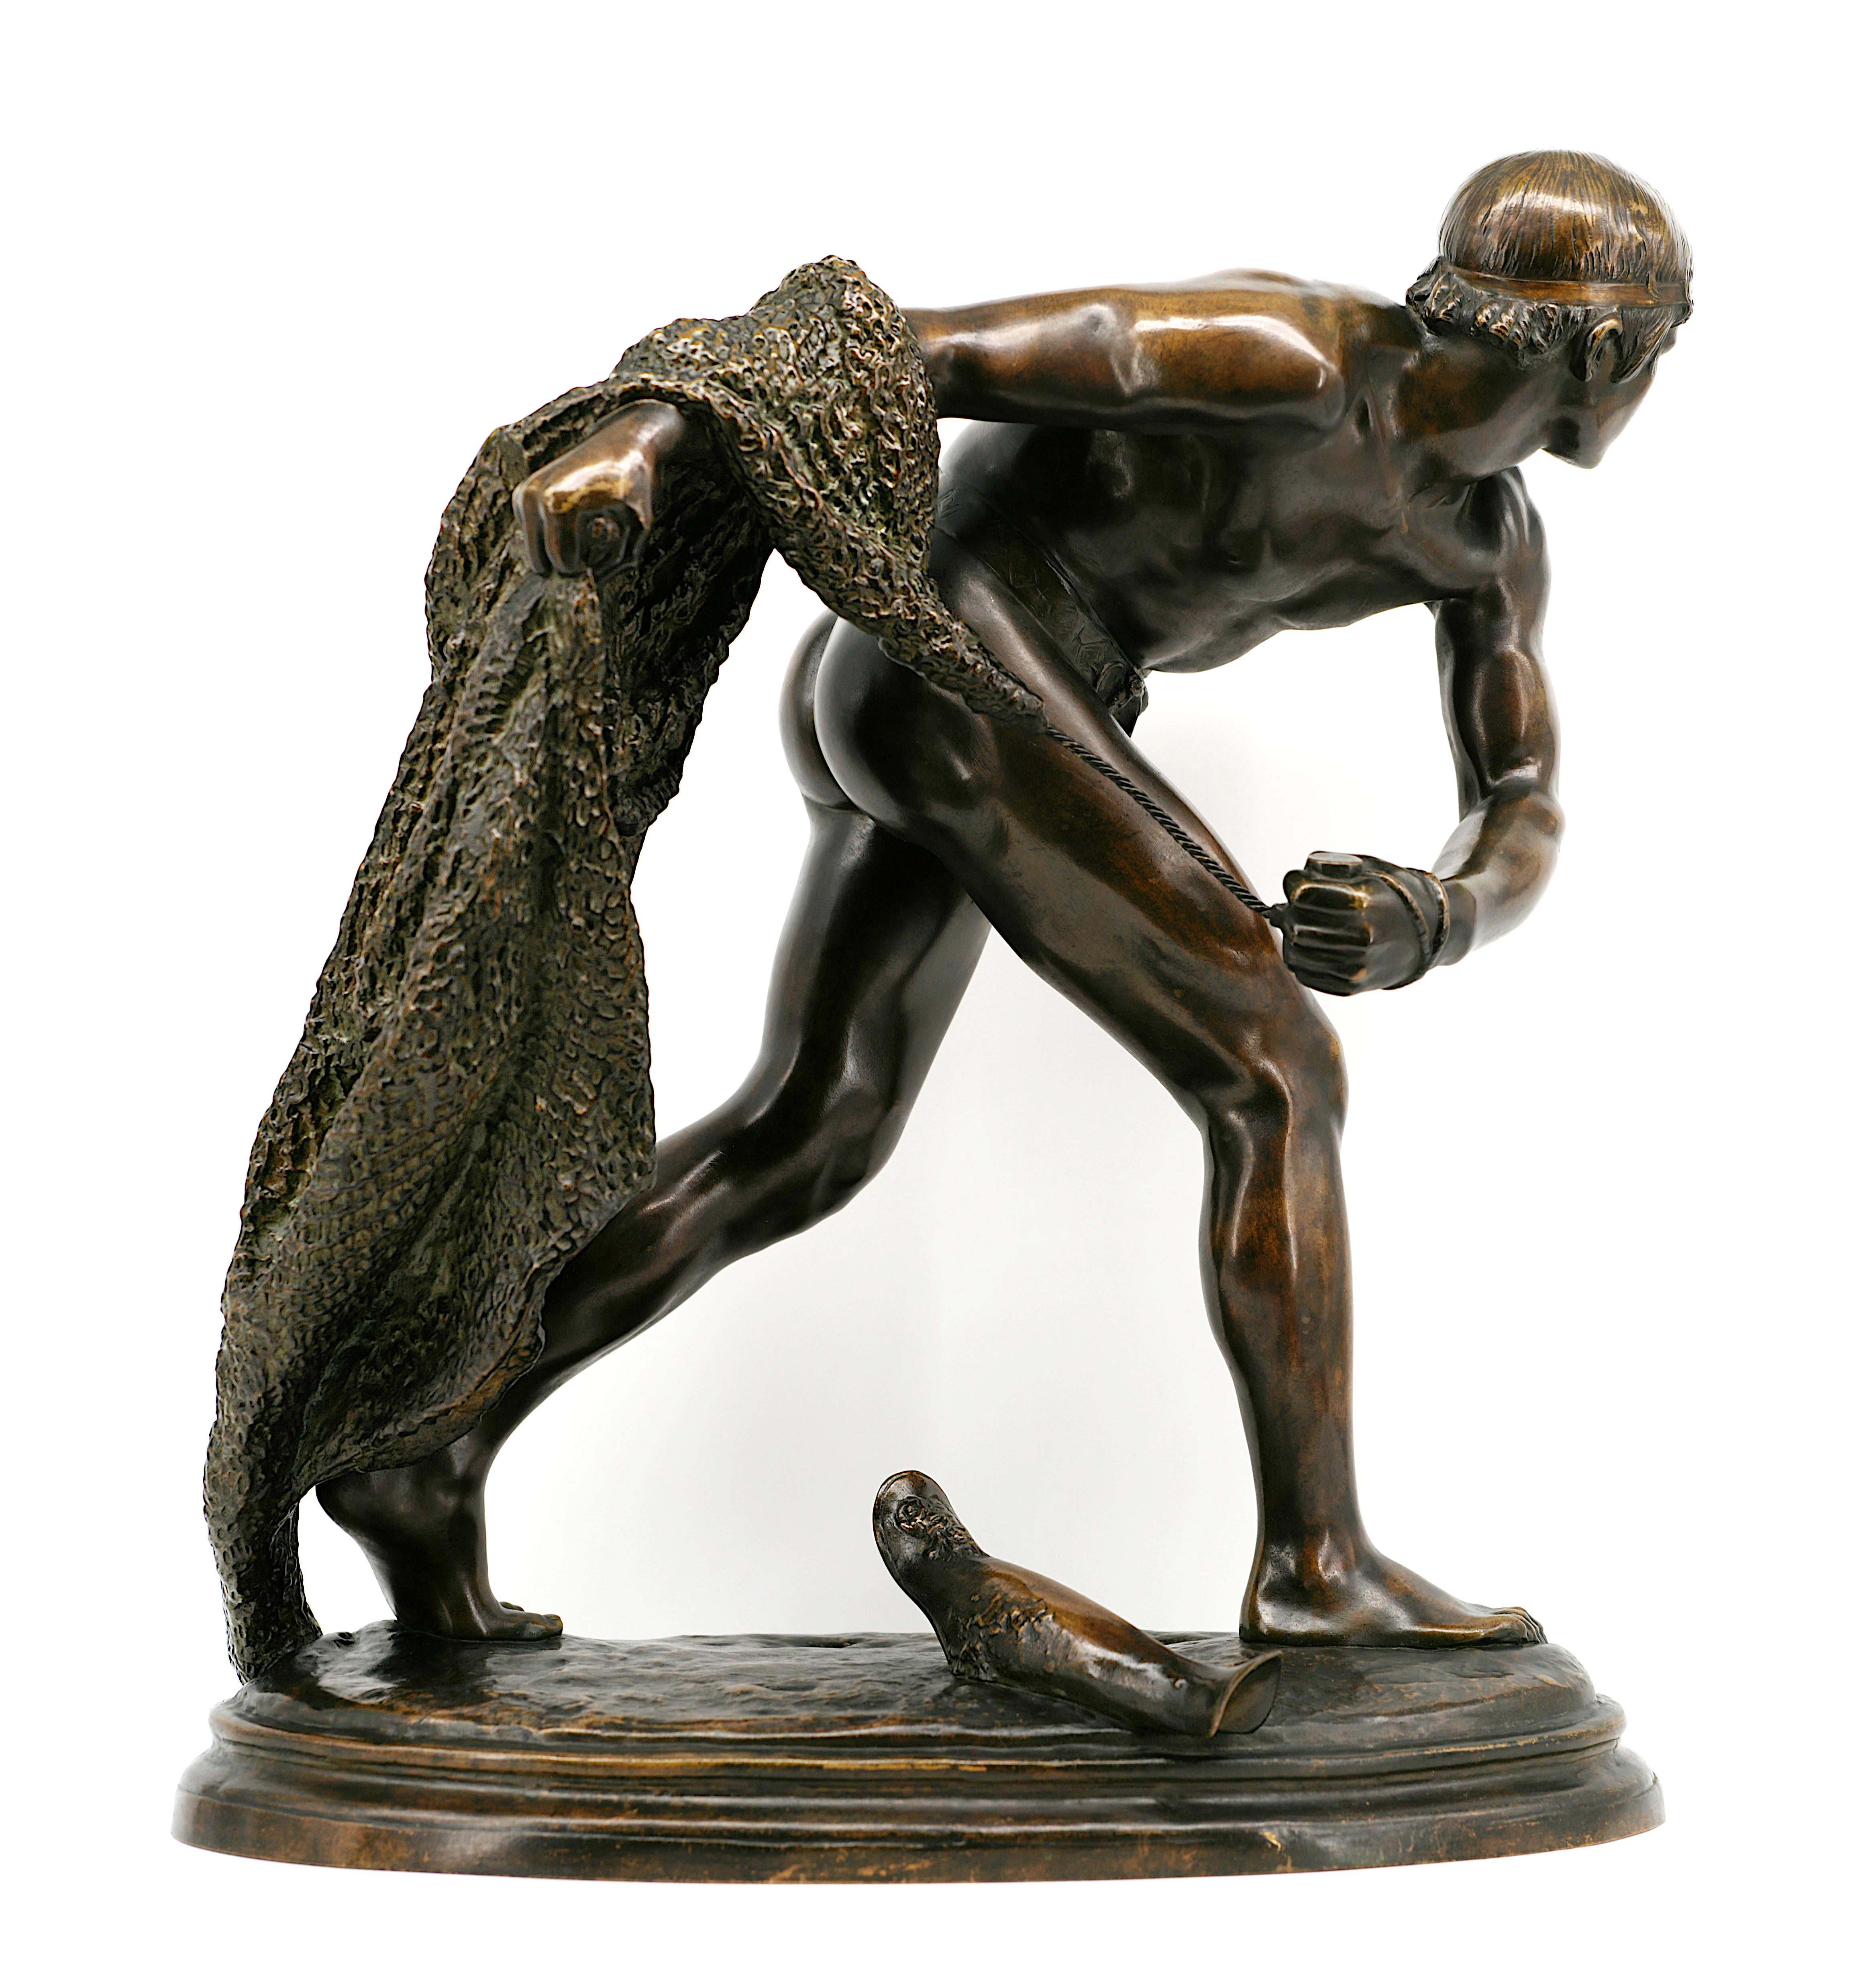 French bronze retiary sculpture by Edmé-Anthony-Paul NOEL, known as Tony Noël, France, ca.1875. Height : 21.85